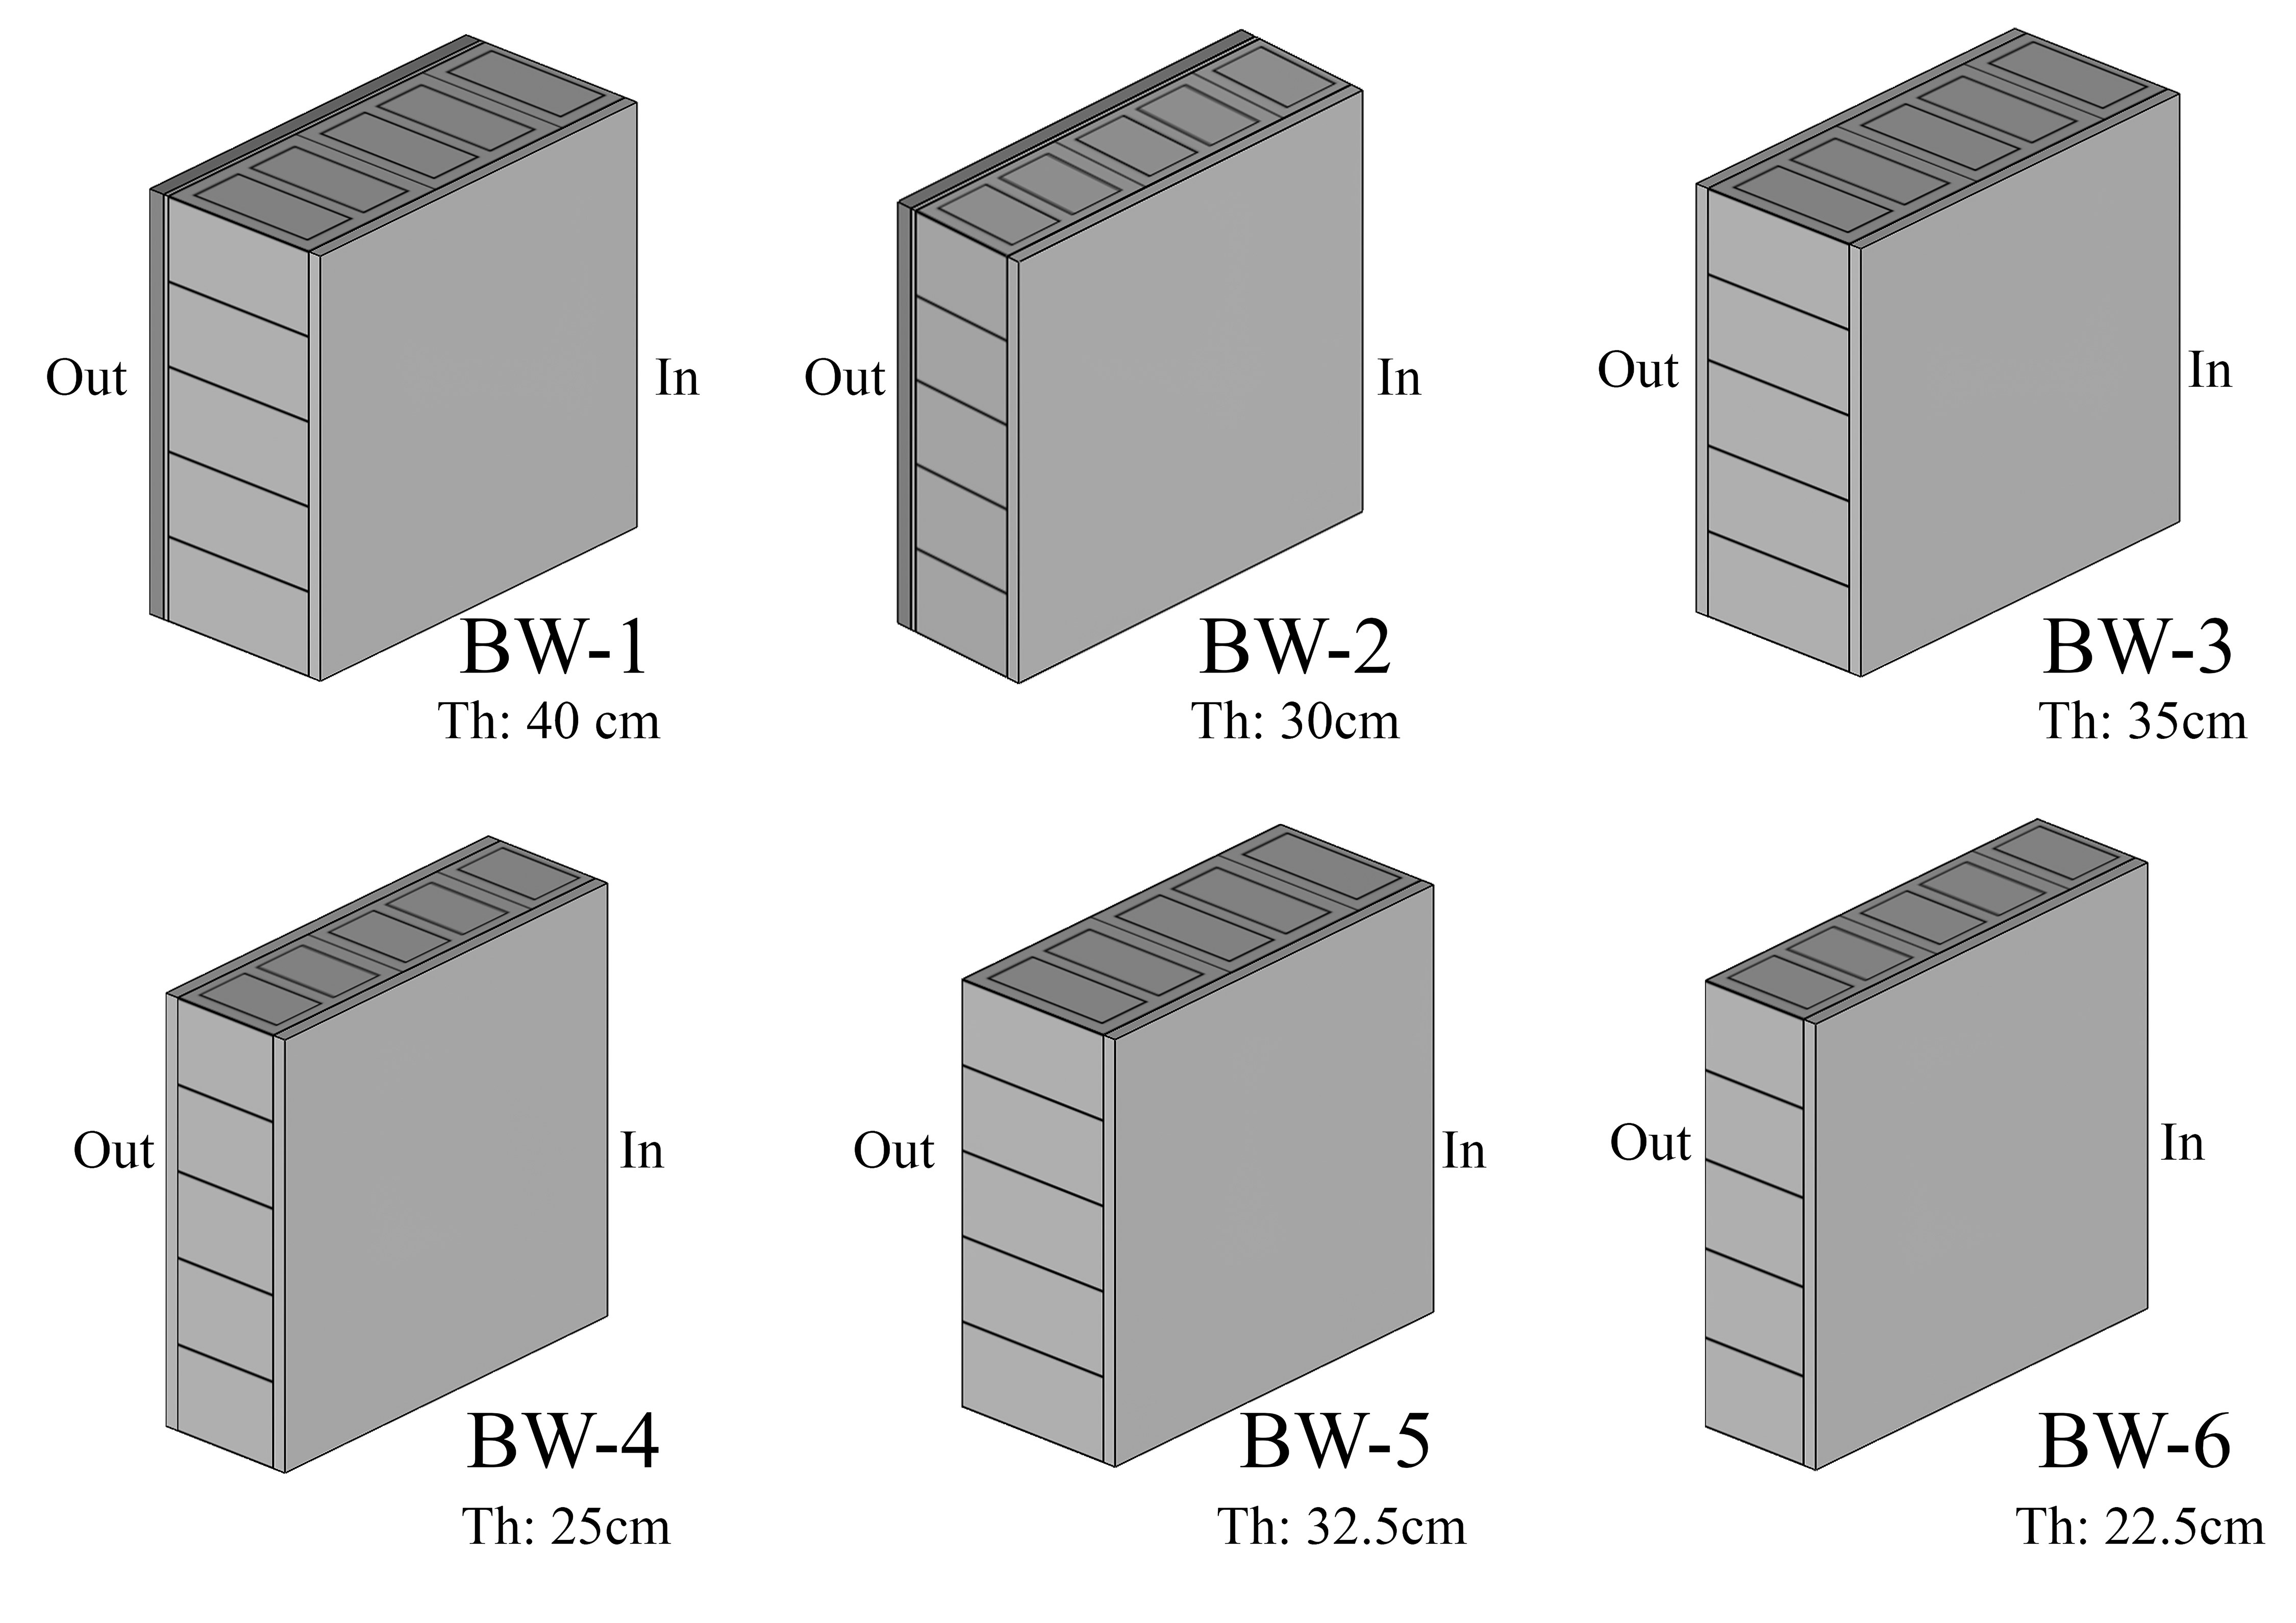 The 3D model of six typical bare walls constructions identified for investigation.